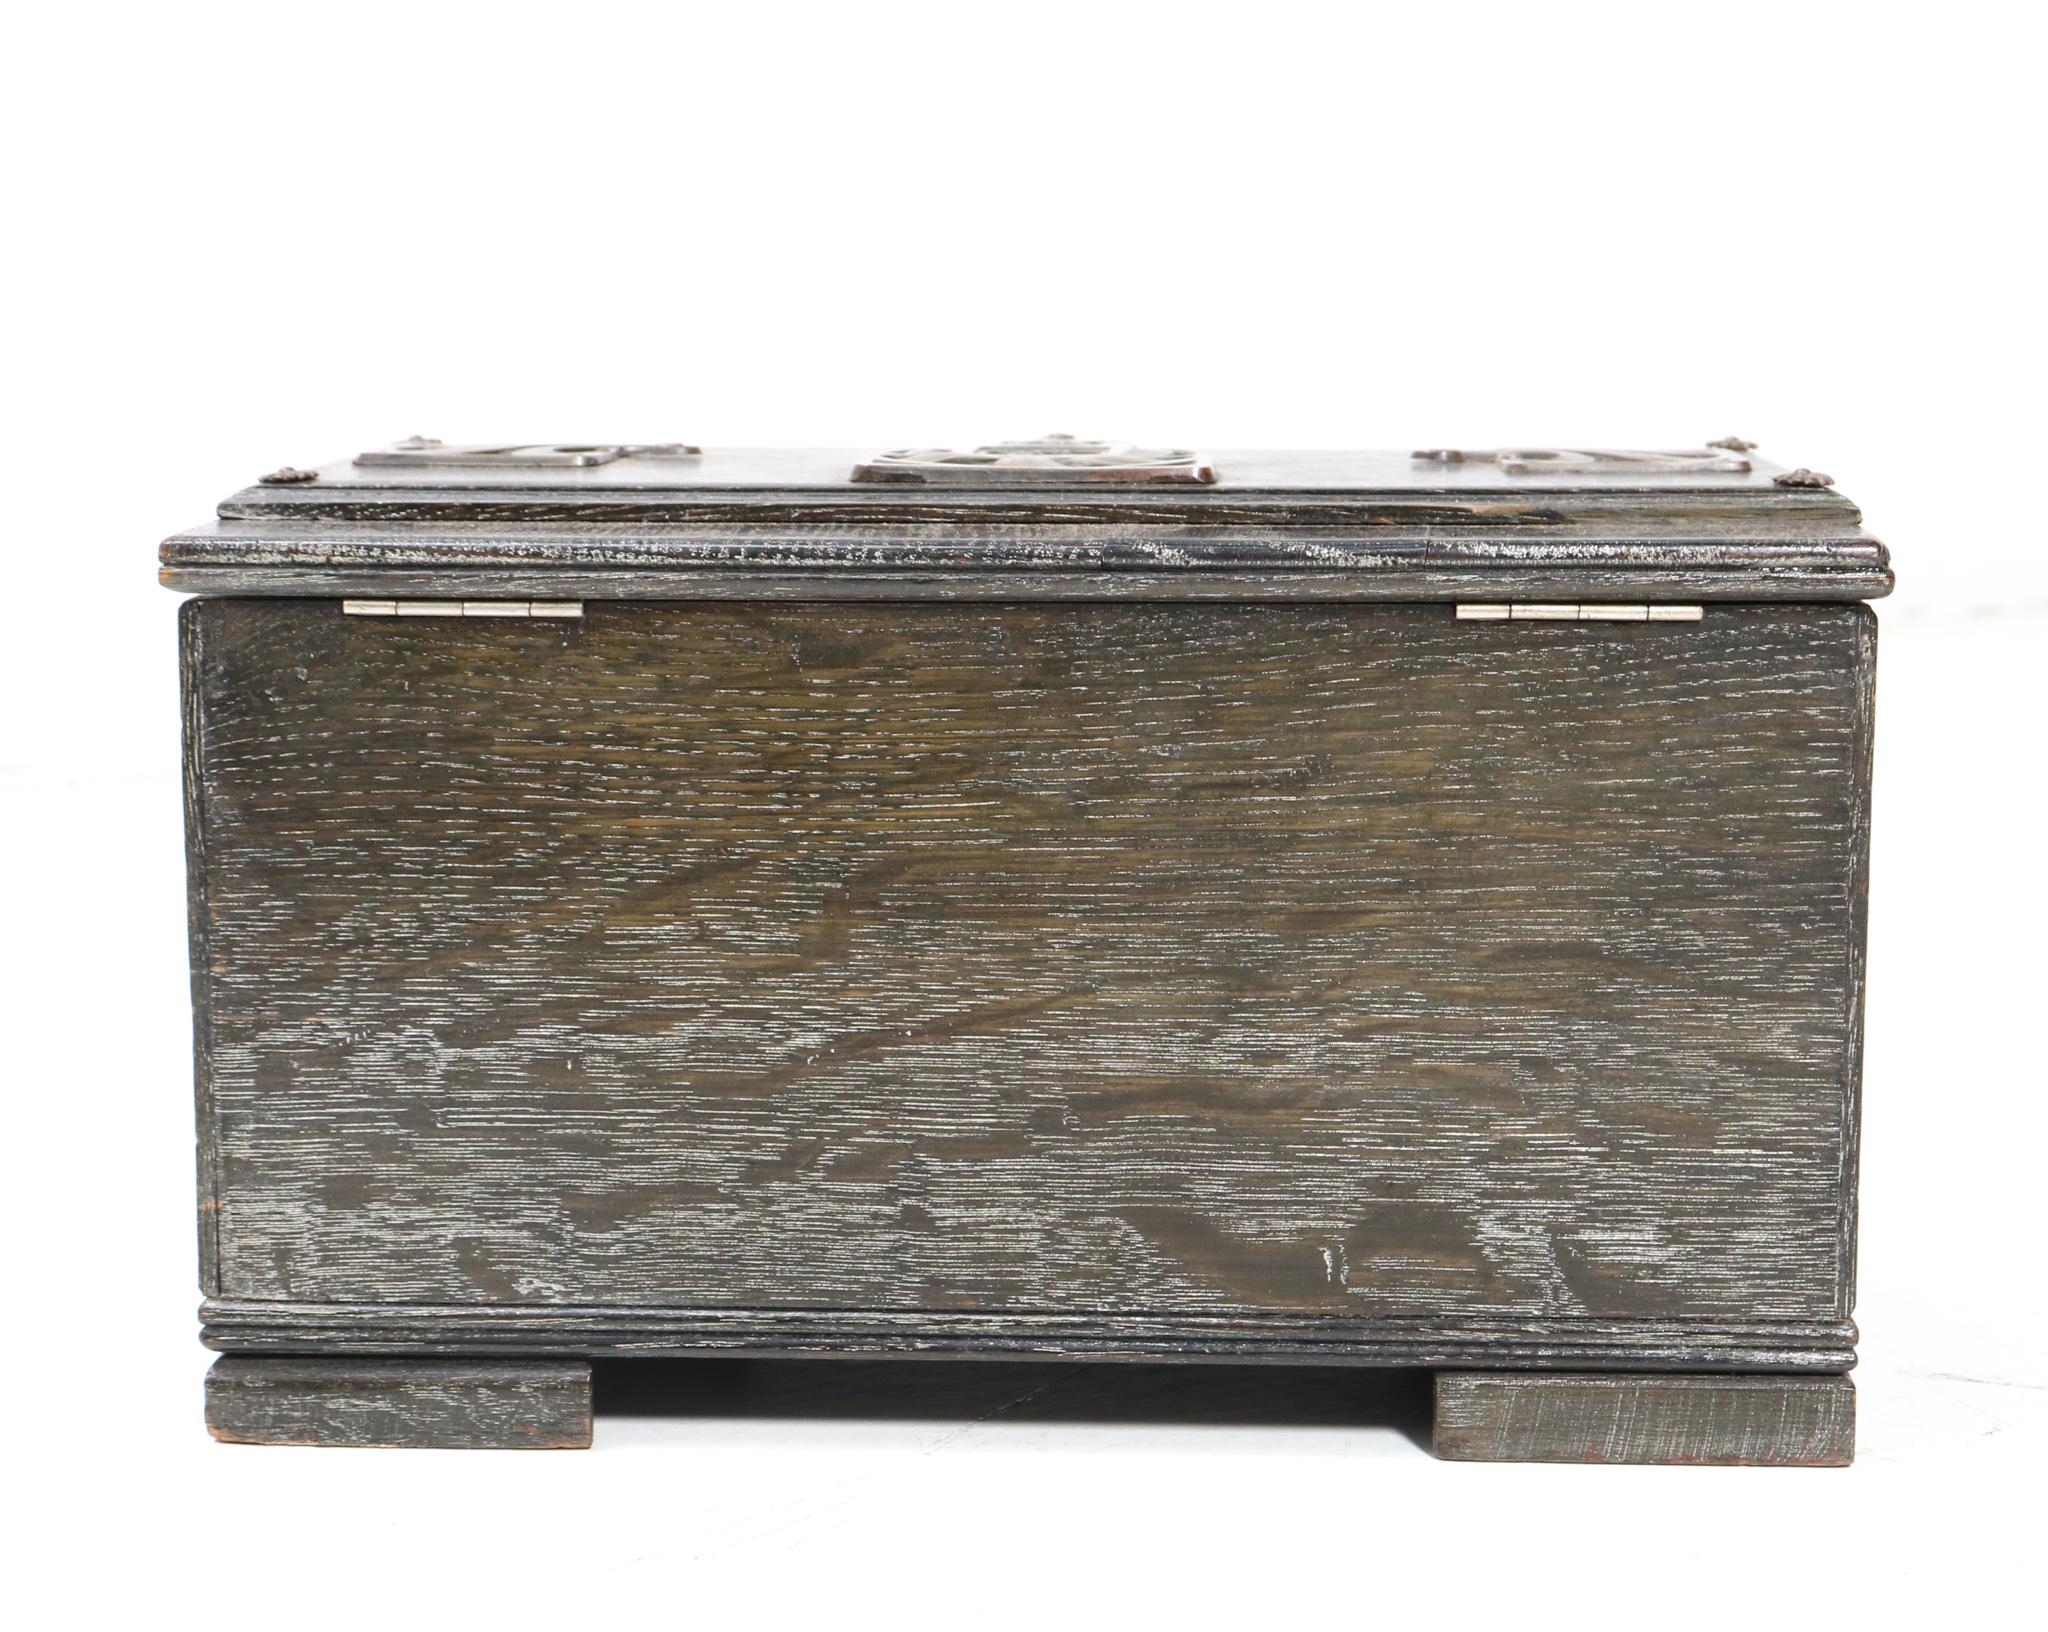 Patinated Stained Oak Vienna Secession Decorative Box, 1900s